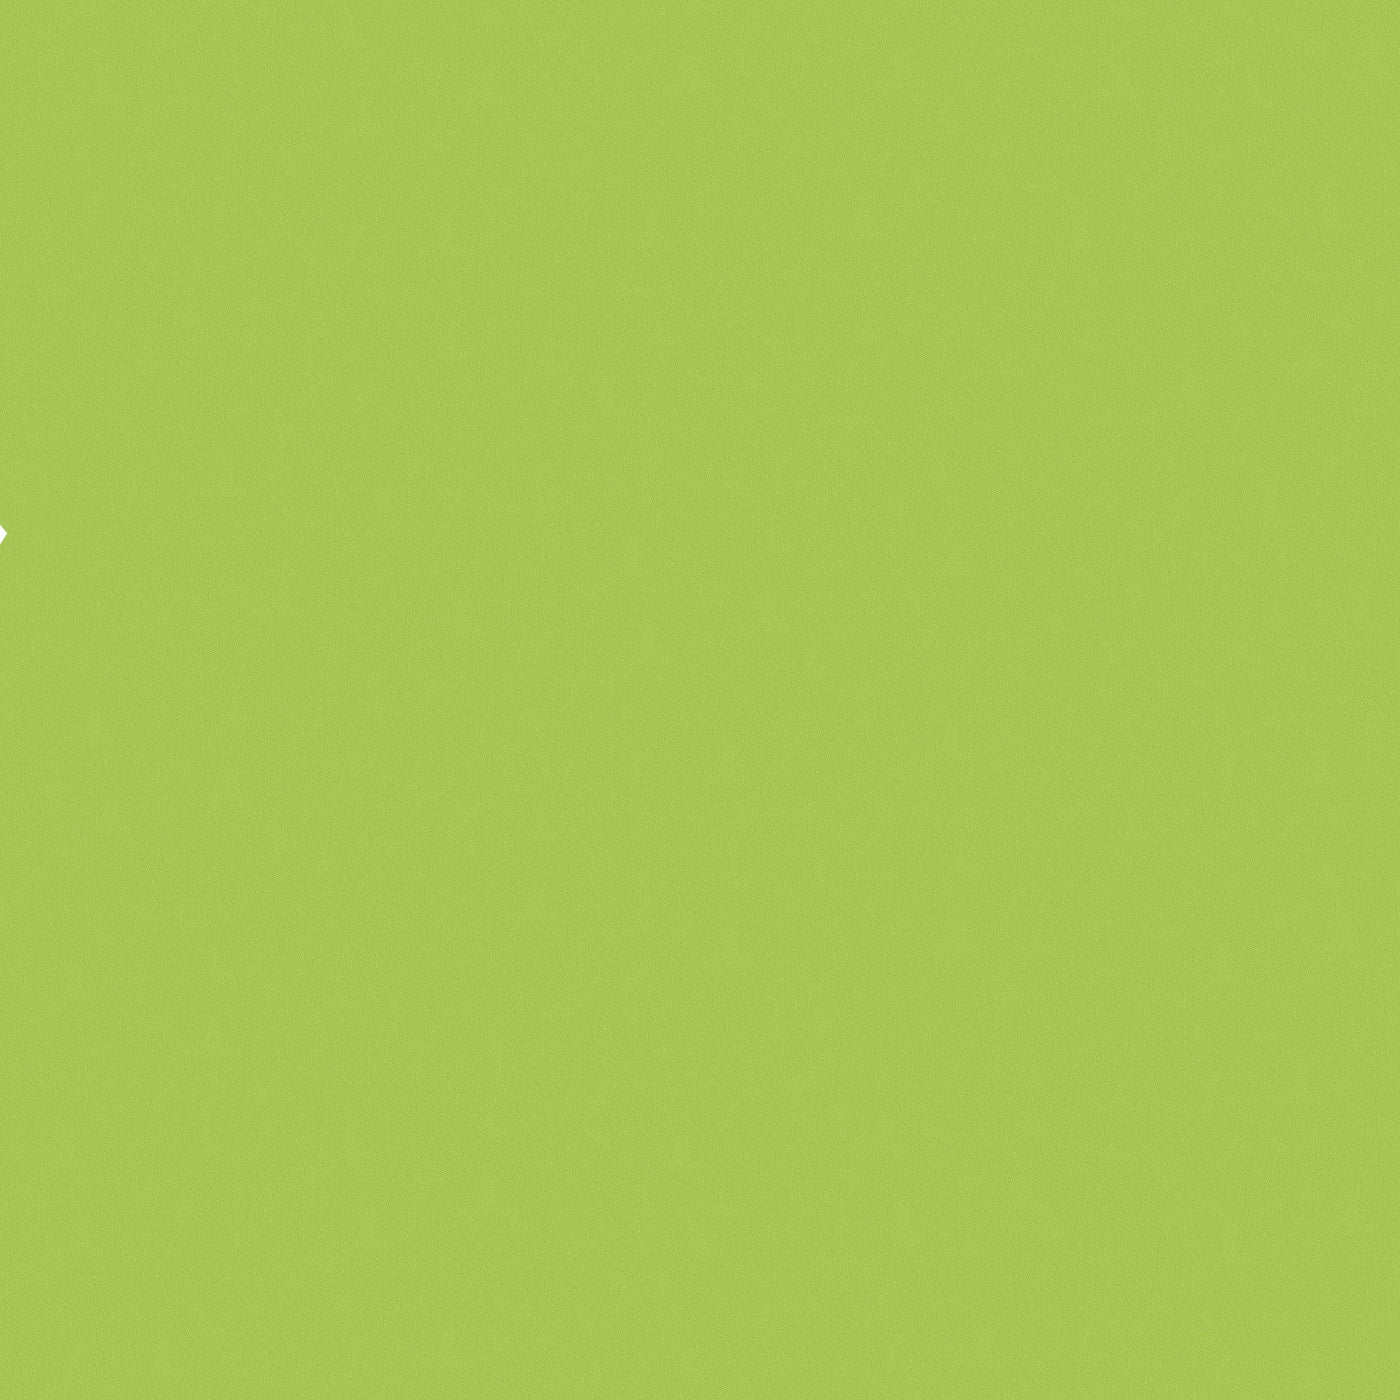 LIME GREEN - brightly colored 12x12 smooth cardstock from Lessebo Paper - ideal for cutting machines